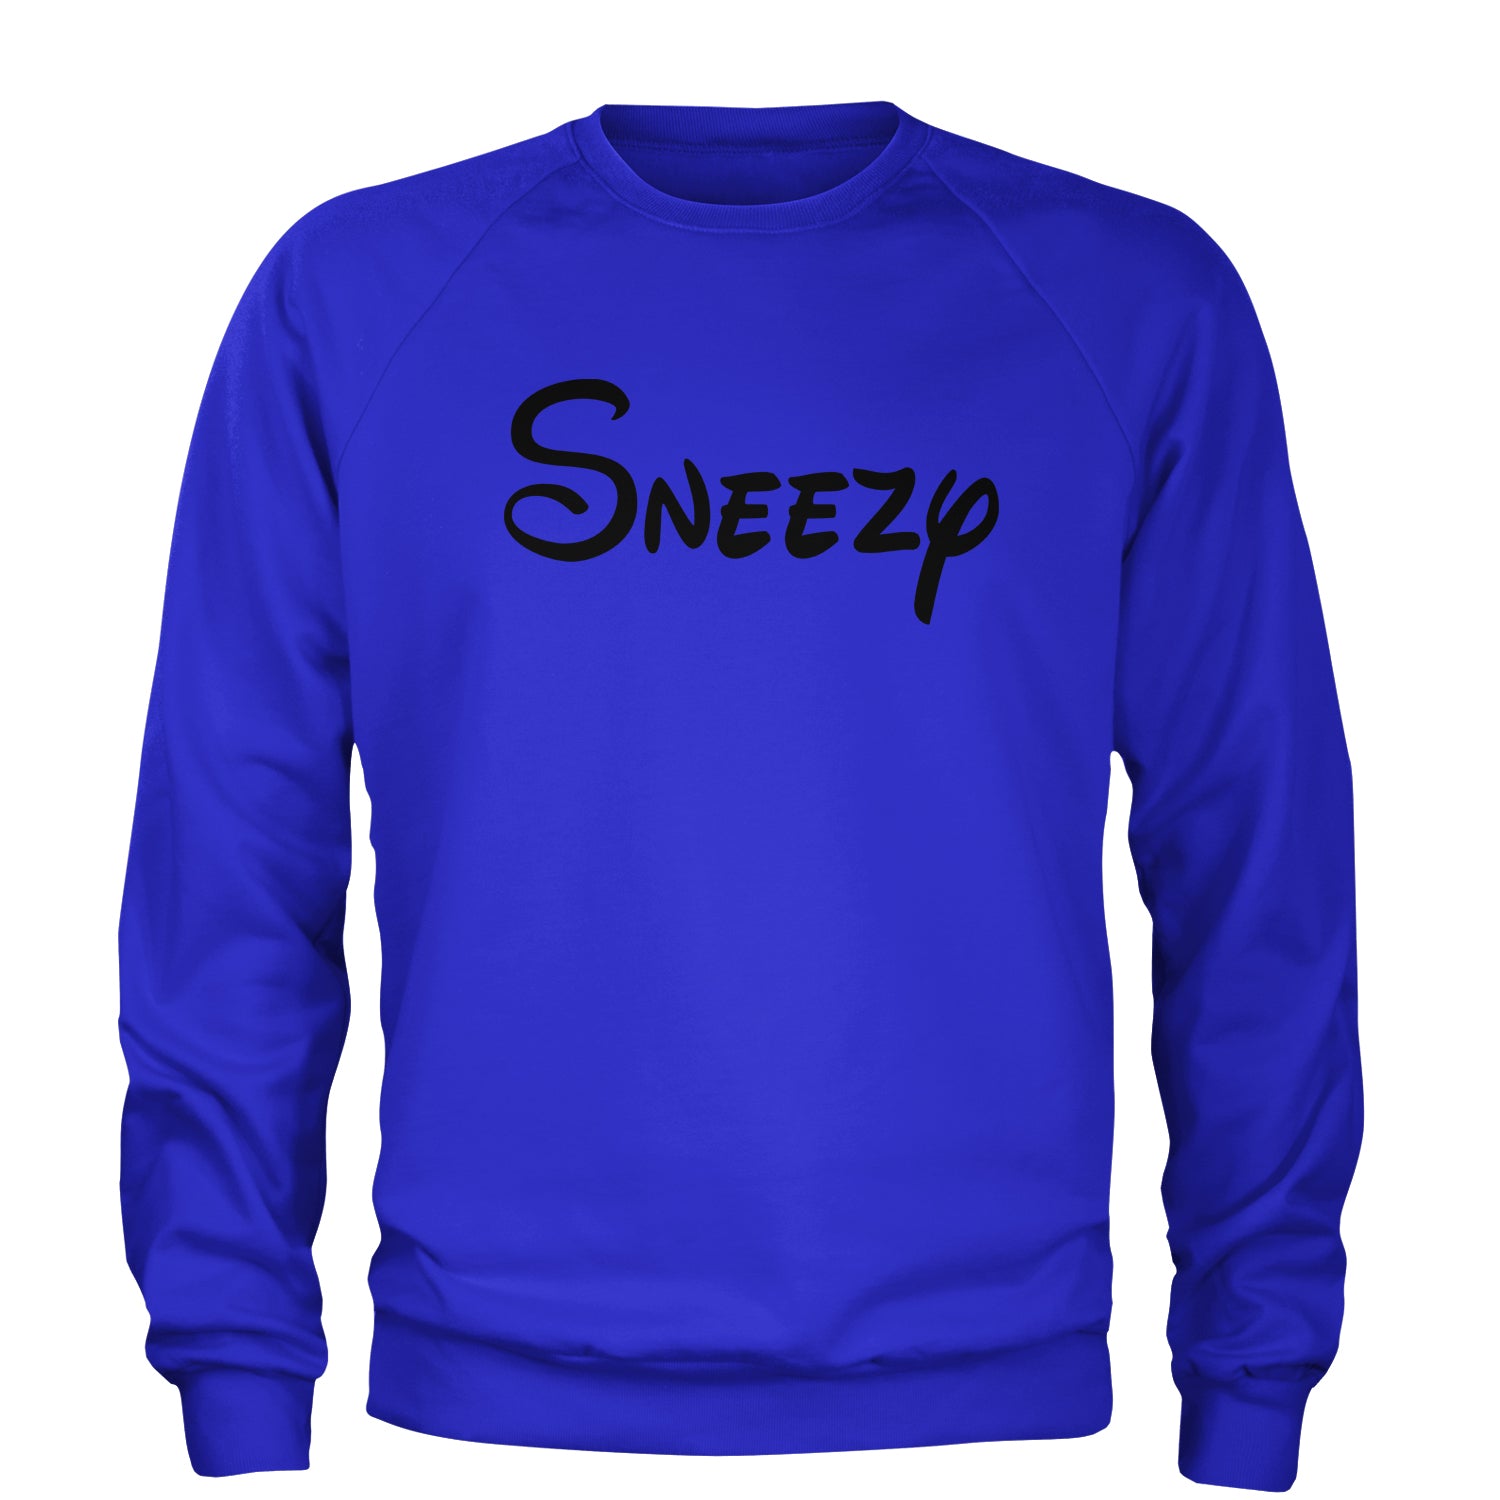 Sneezy - 7 Dwarfs Costume Adult Crewneck Sweatshirt and, costume, dwarfs, group, halloween, matching, seven, snow, the, white by Expression Tees